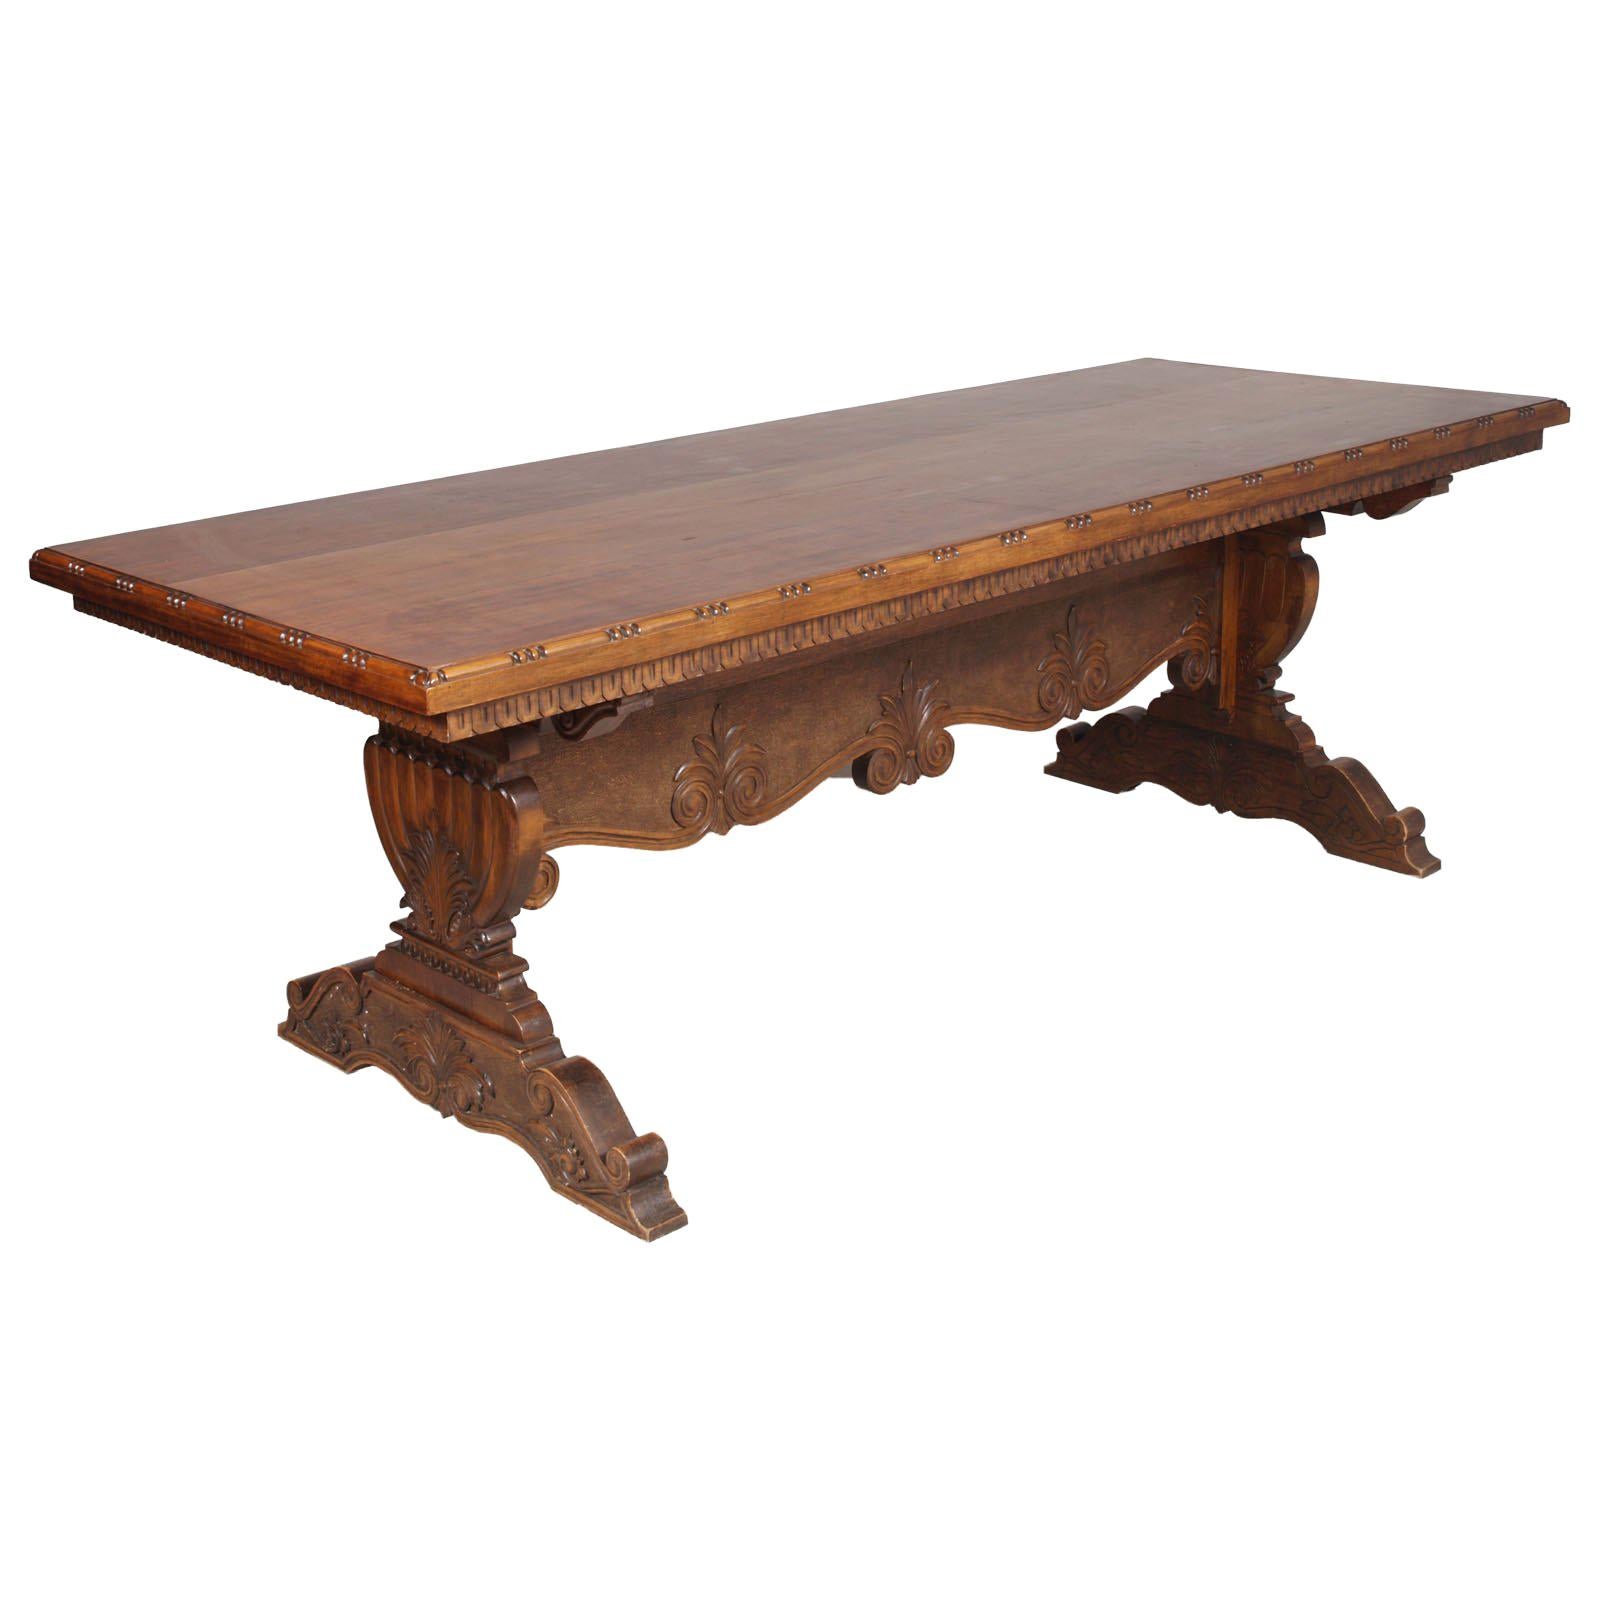 Antique Important Tuscany Renaissance Dining Table, Hand Carved Solid Walnut 